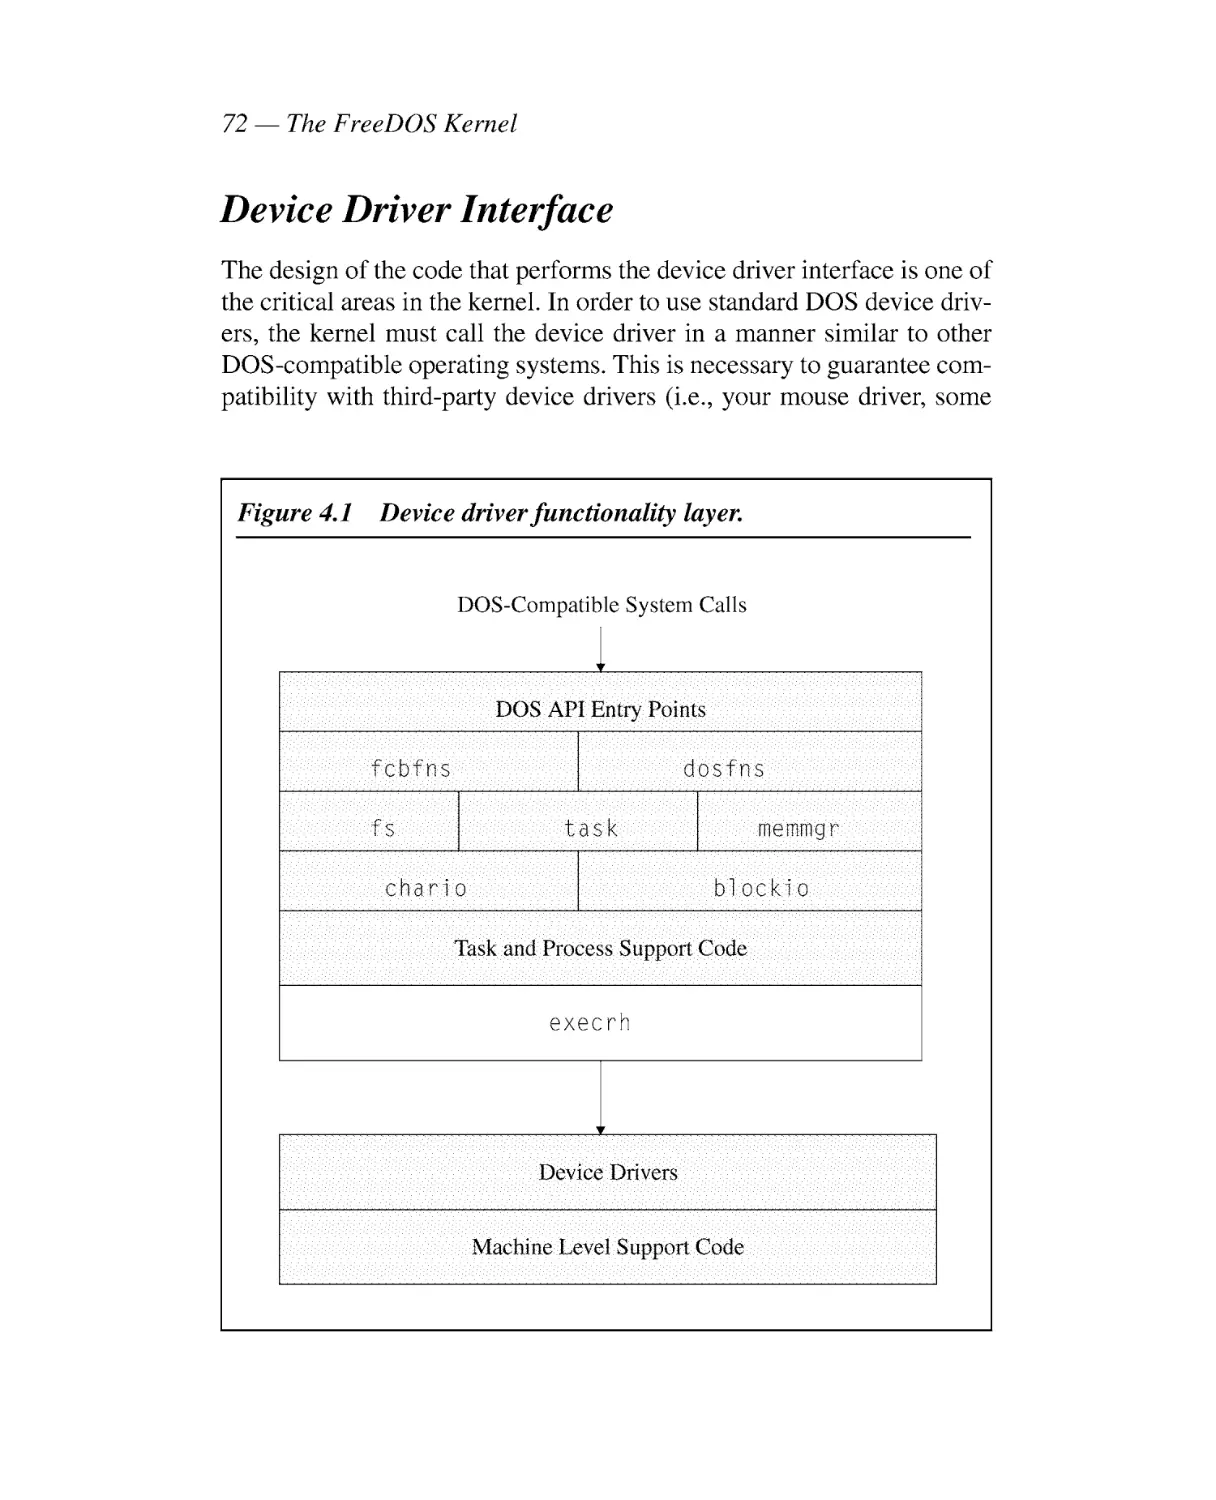 Device Driver Interface